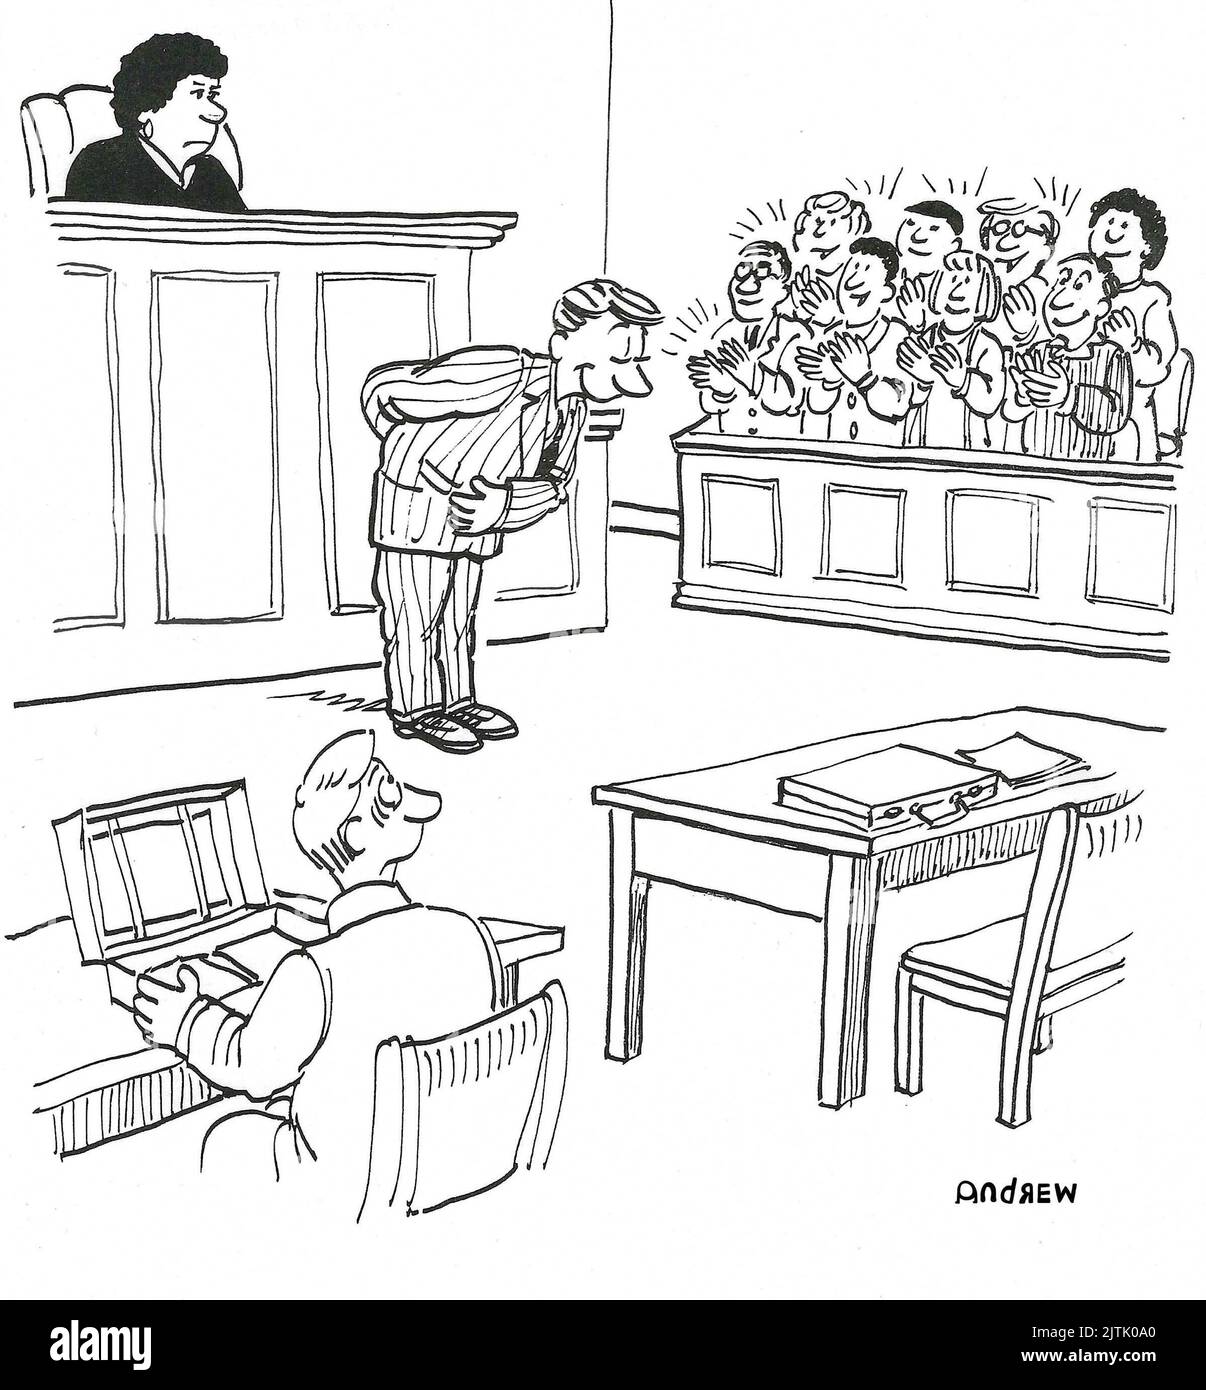 A lawyer has impressed the jury. Stock Photo